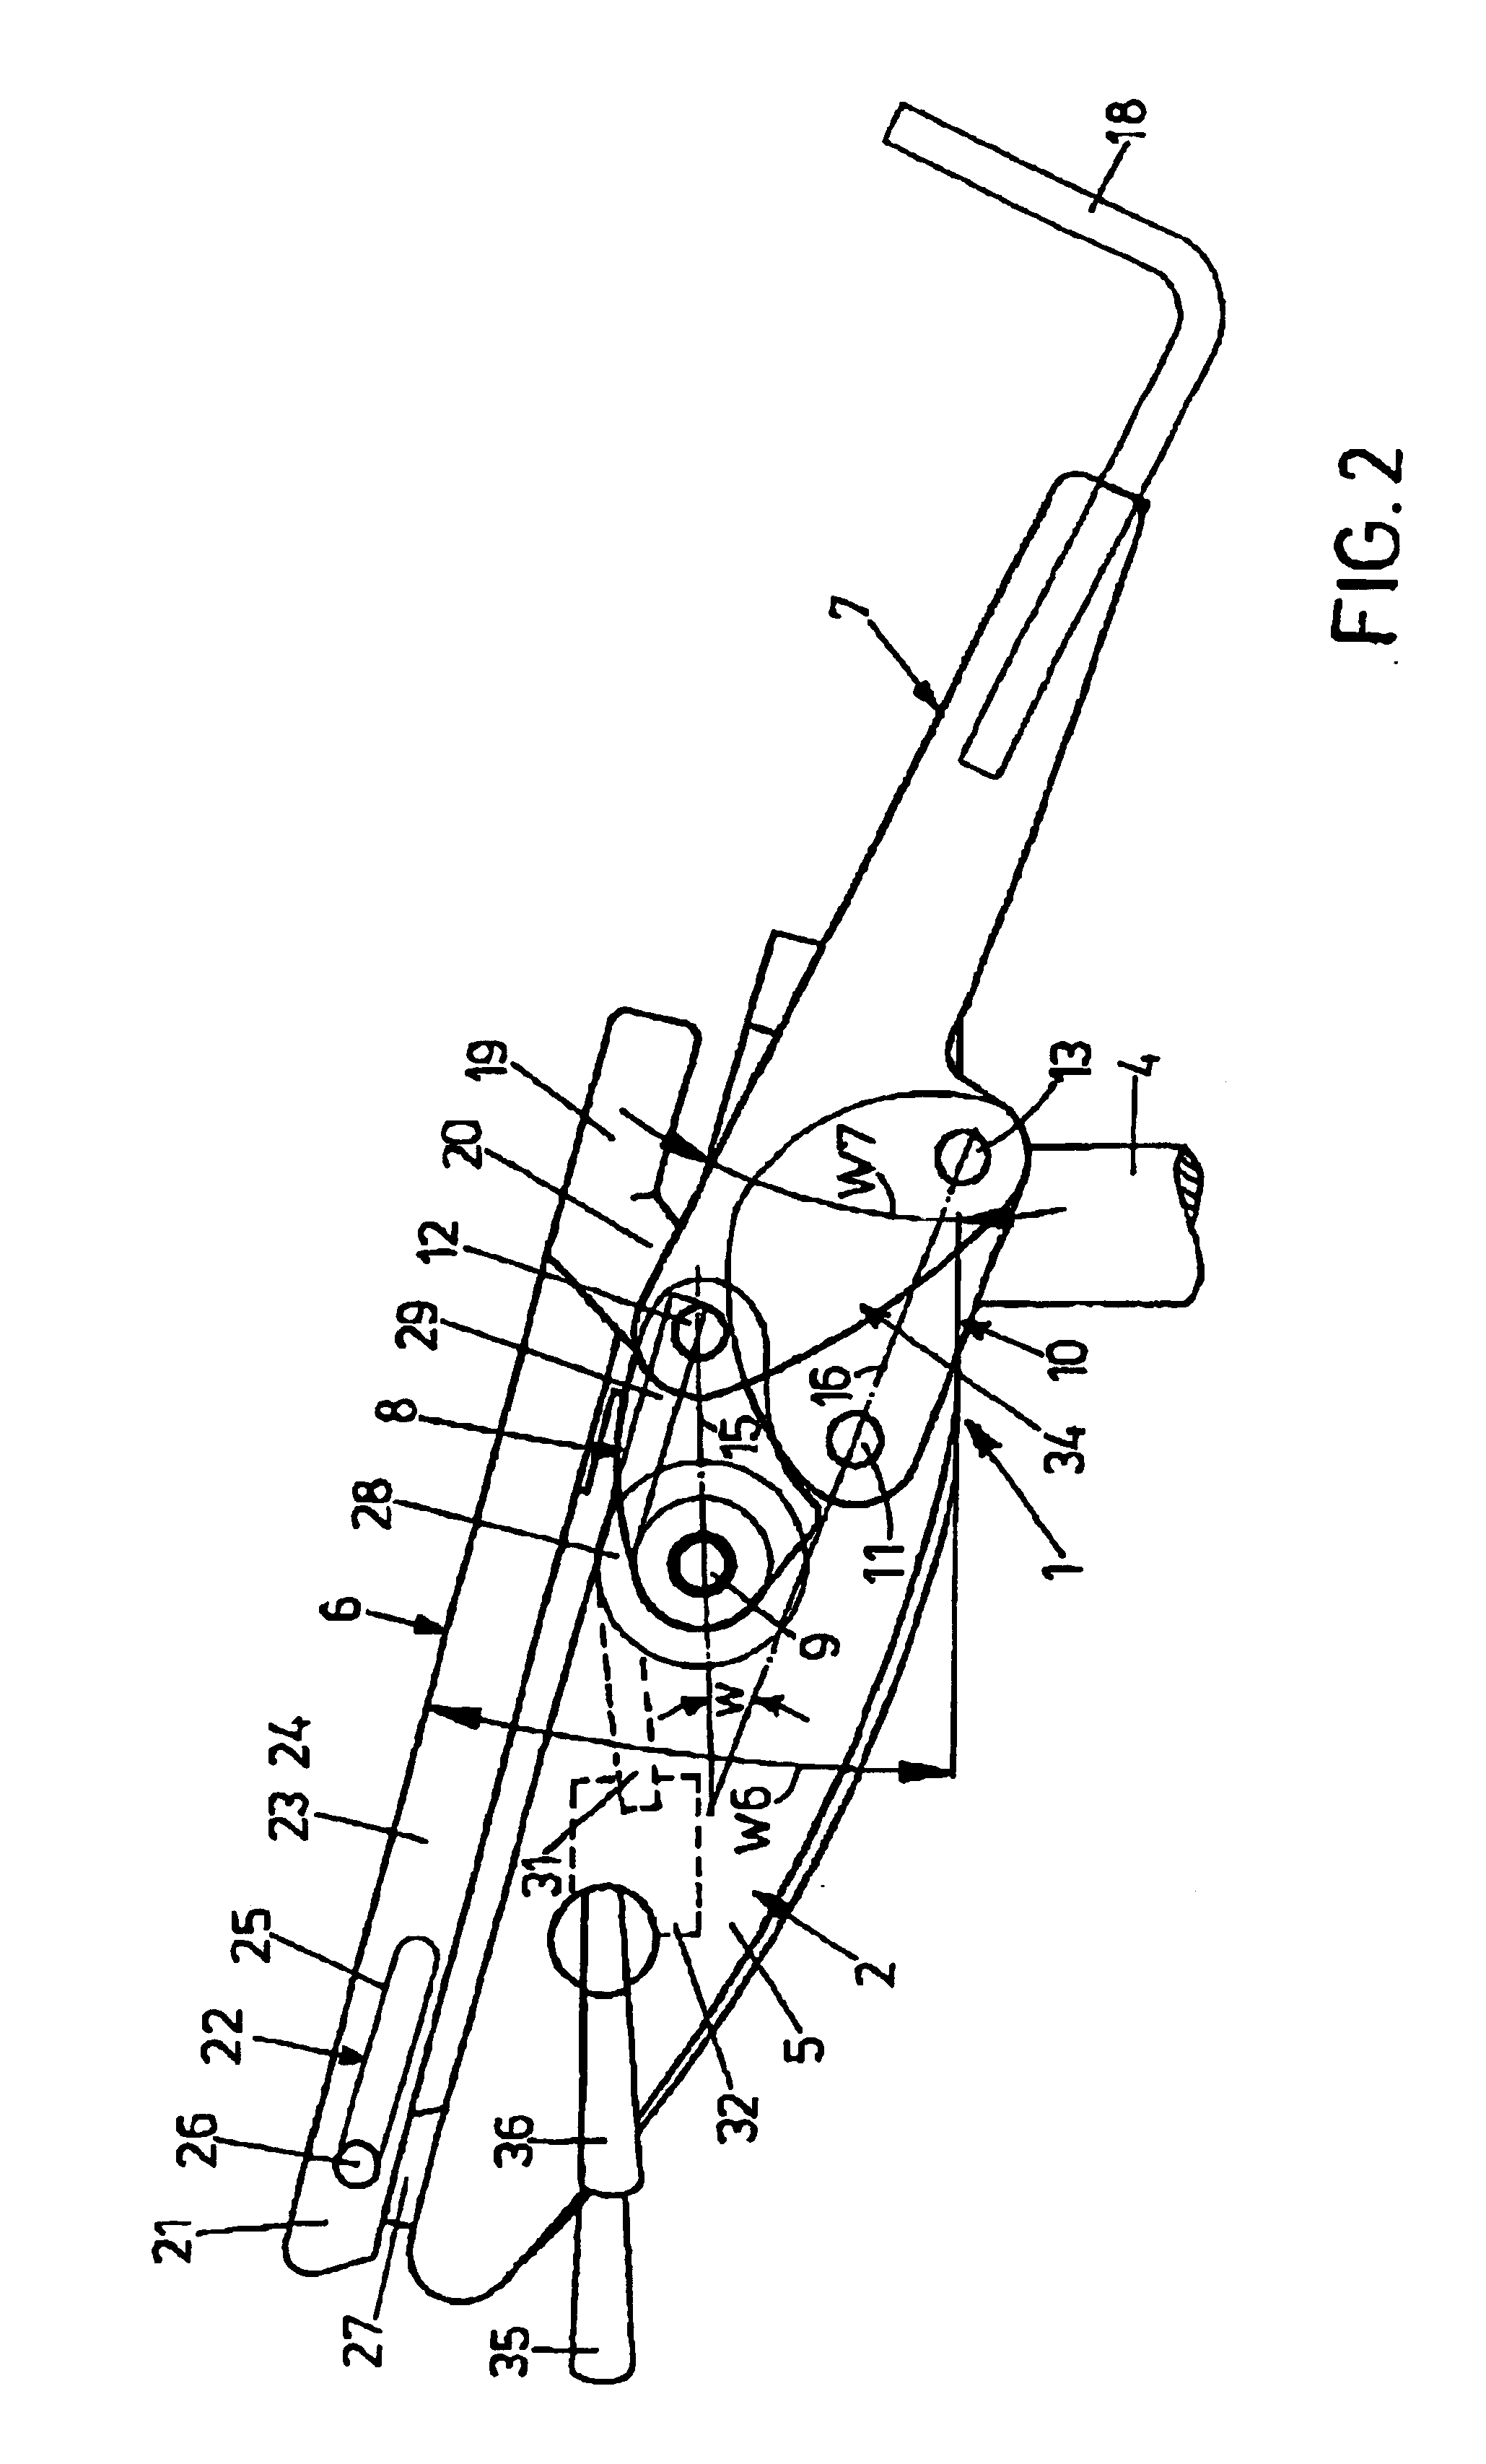 Synchronizing mechanism for correlated seat/backrest motion of an office chair